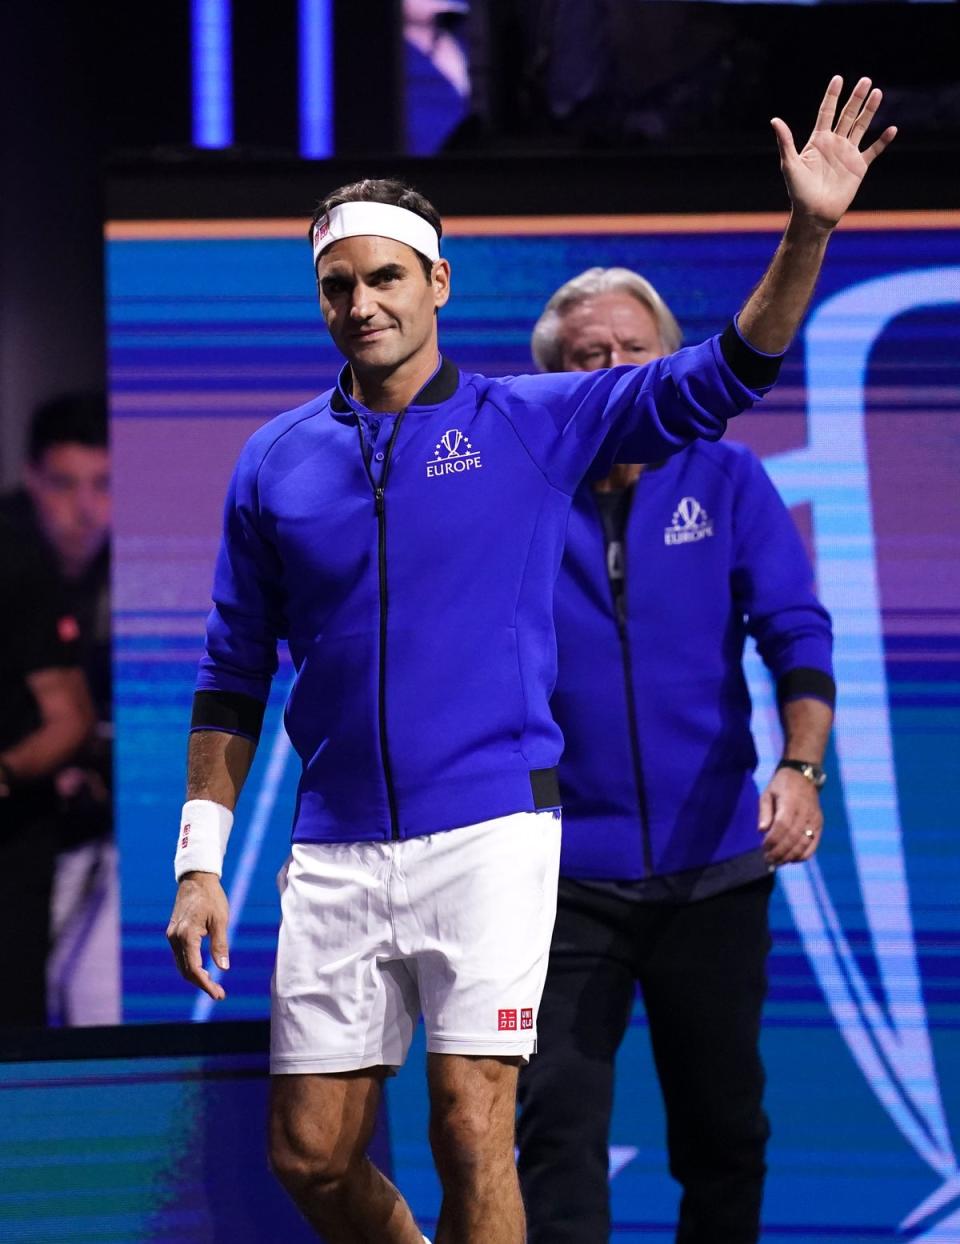 Roger Federer brought his professional career to an end with defeat in the doubles at the Laver Cup (John Walton/PA) (PA Wire)